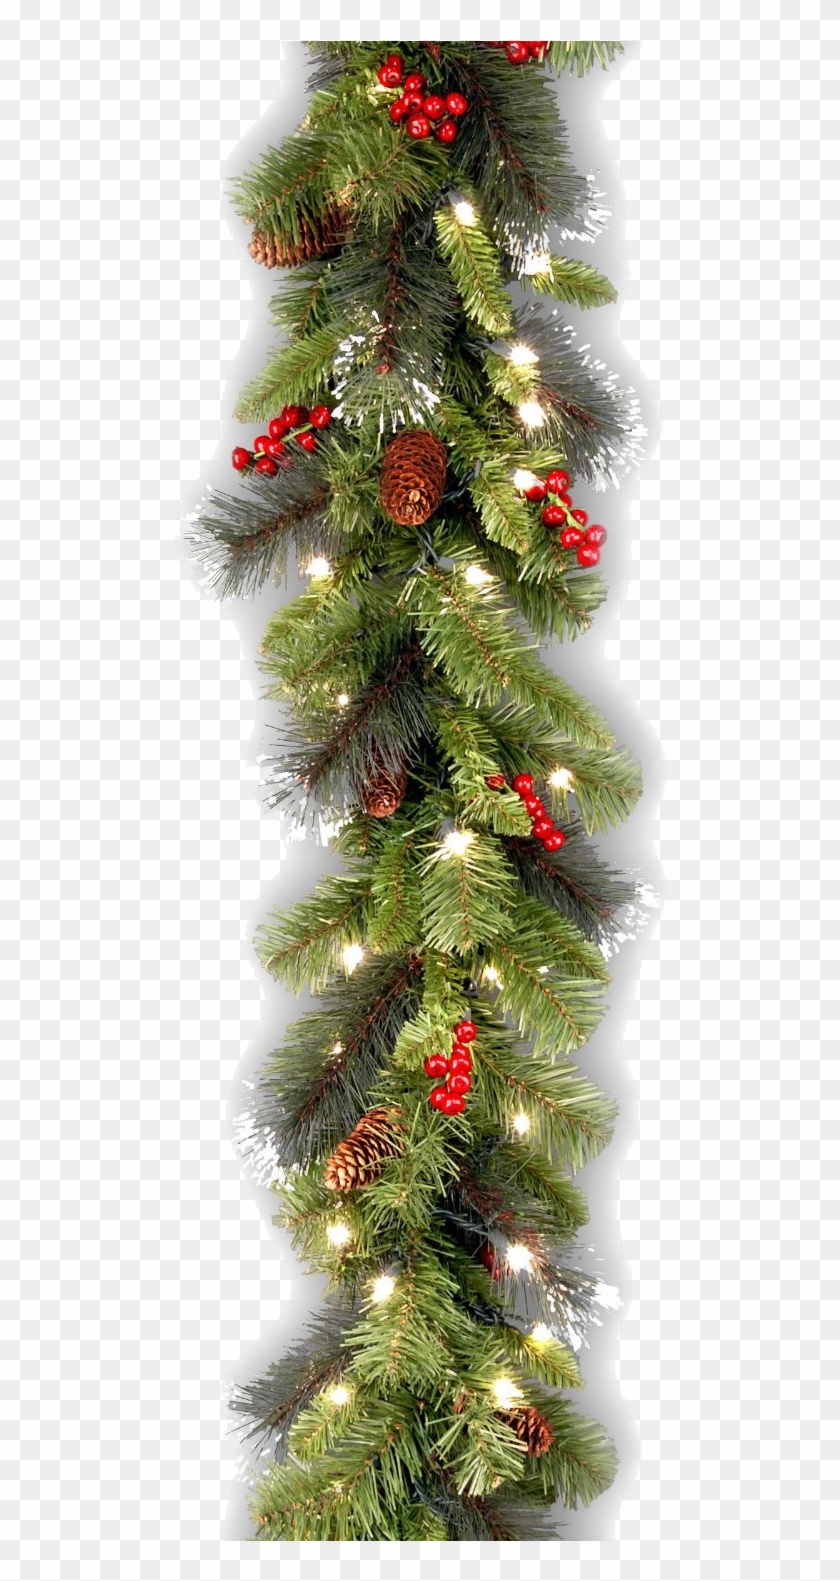 Pngs De Natal - Lighted Christmas Garland Png Clipart #3321773